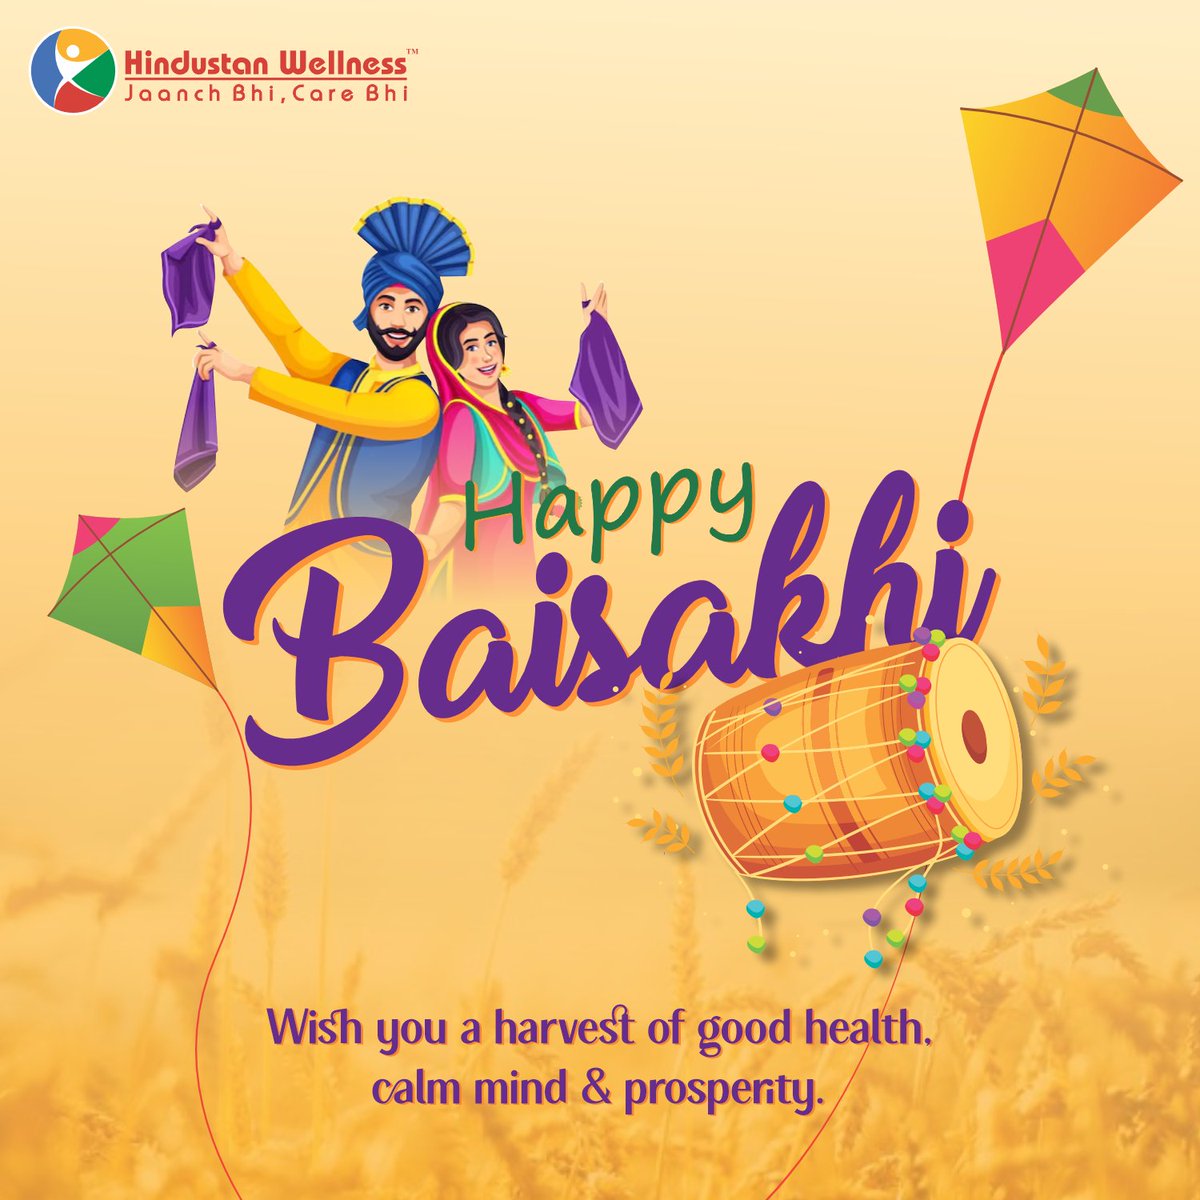 Wishing you a Baisakhi blessed with good health, wealth, and endless opportunities.

Happy Baisakhi!

#baisakhifestival #Baisakhi #festival #goodhealth #wealth #prosperity #happiness #healthcare #healthy #jaanchbhicarebhi #HindustanWellness